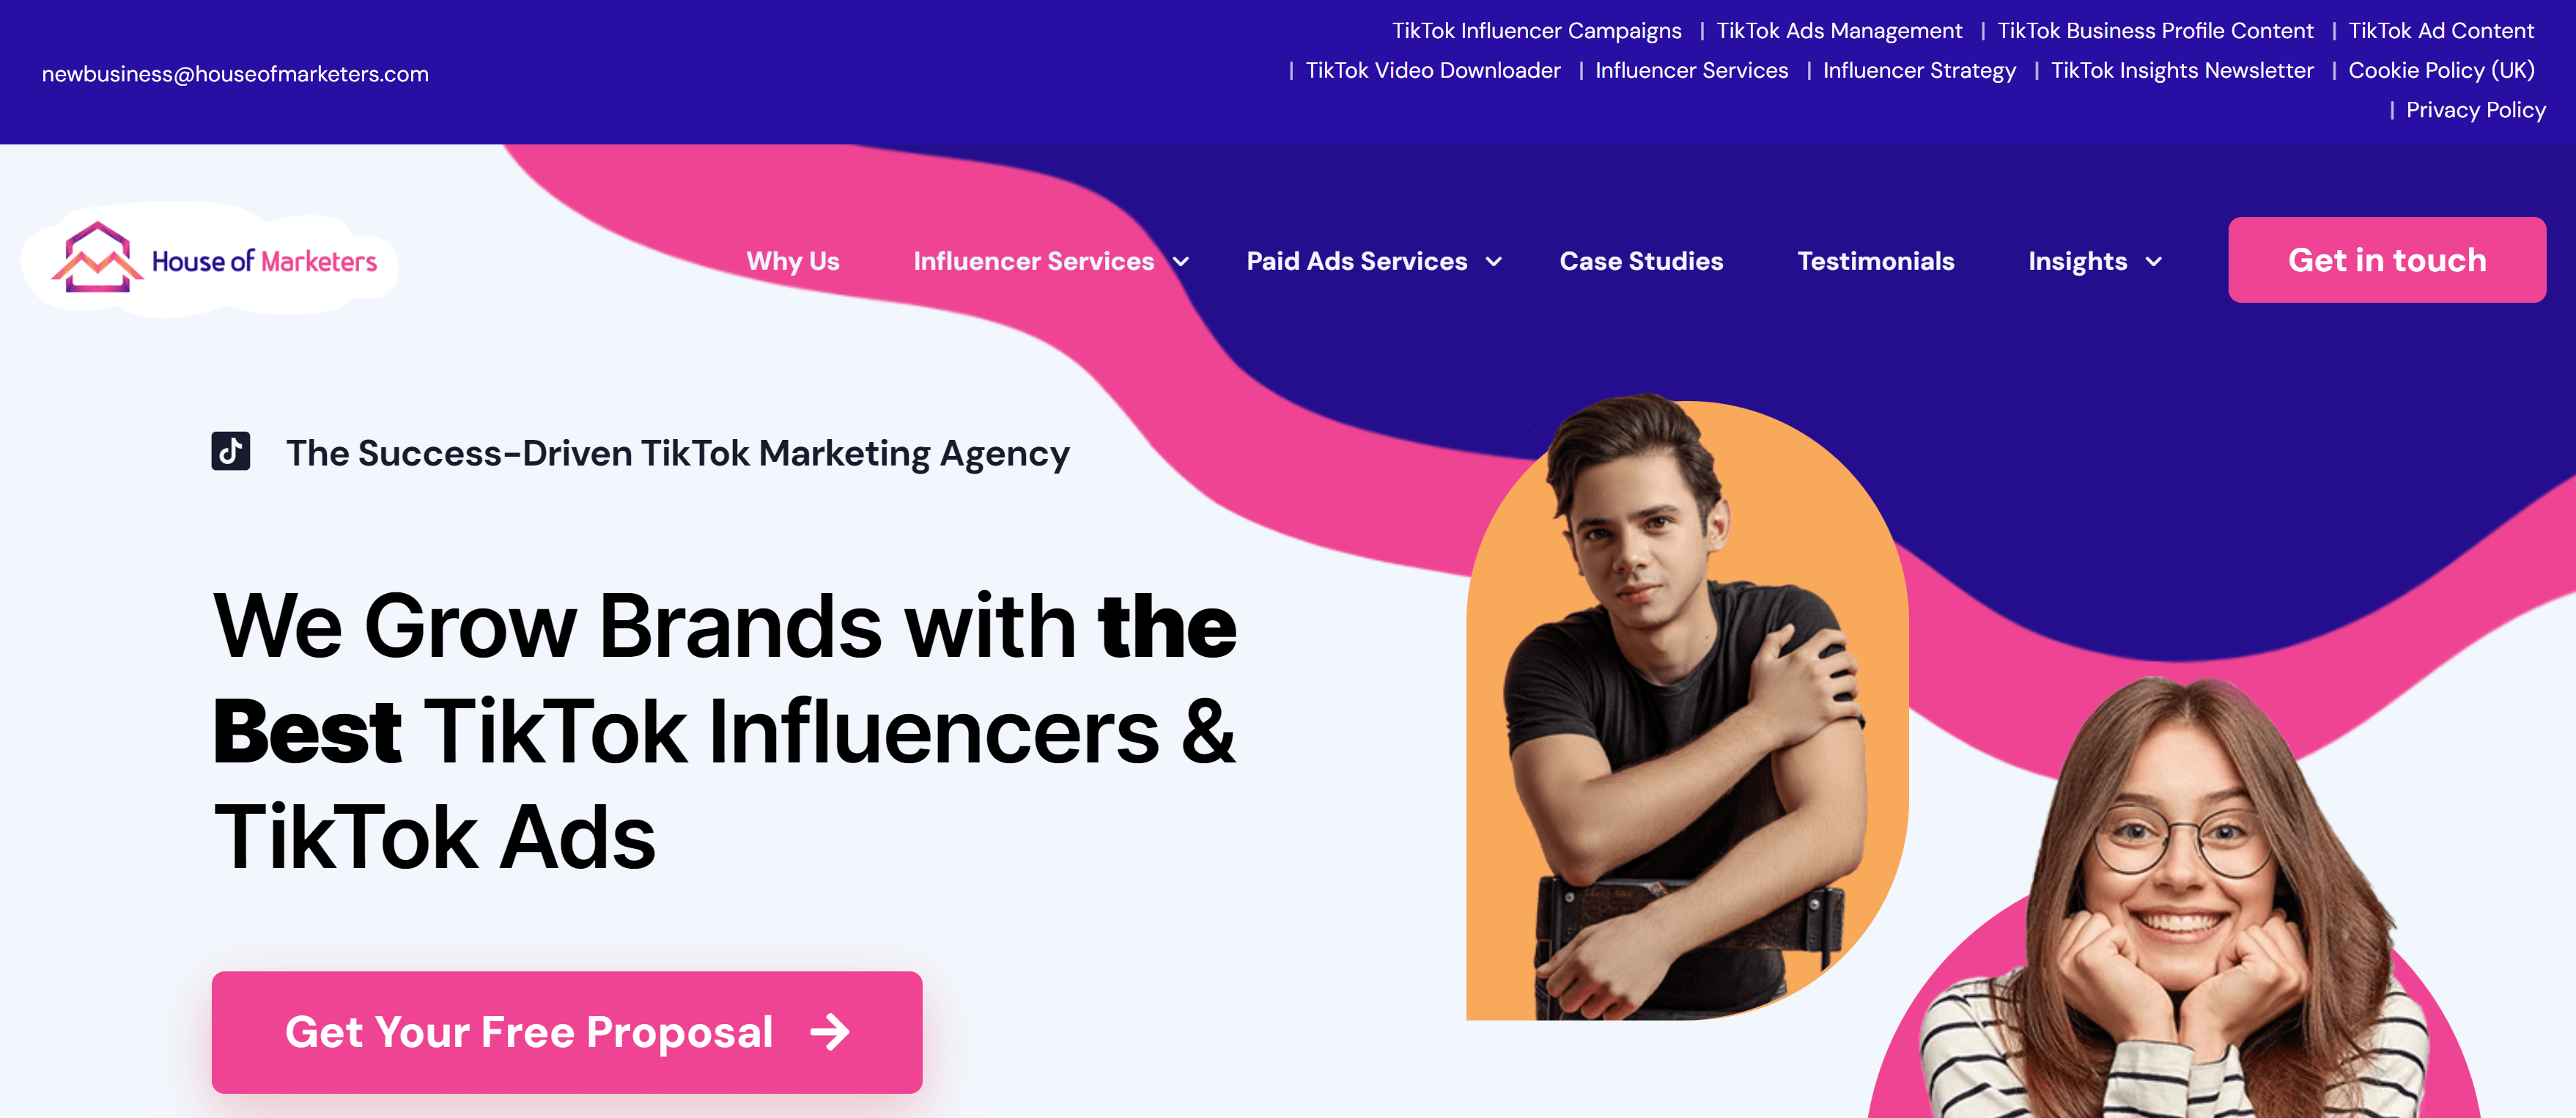 7 Examples of Successful Influencer Marketing Campaigns